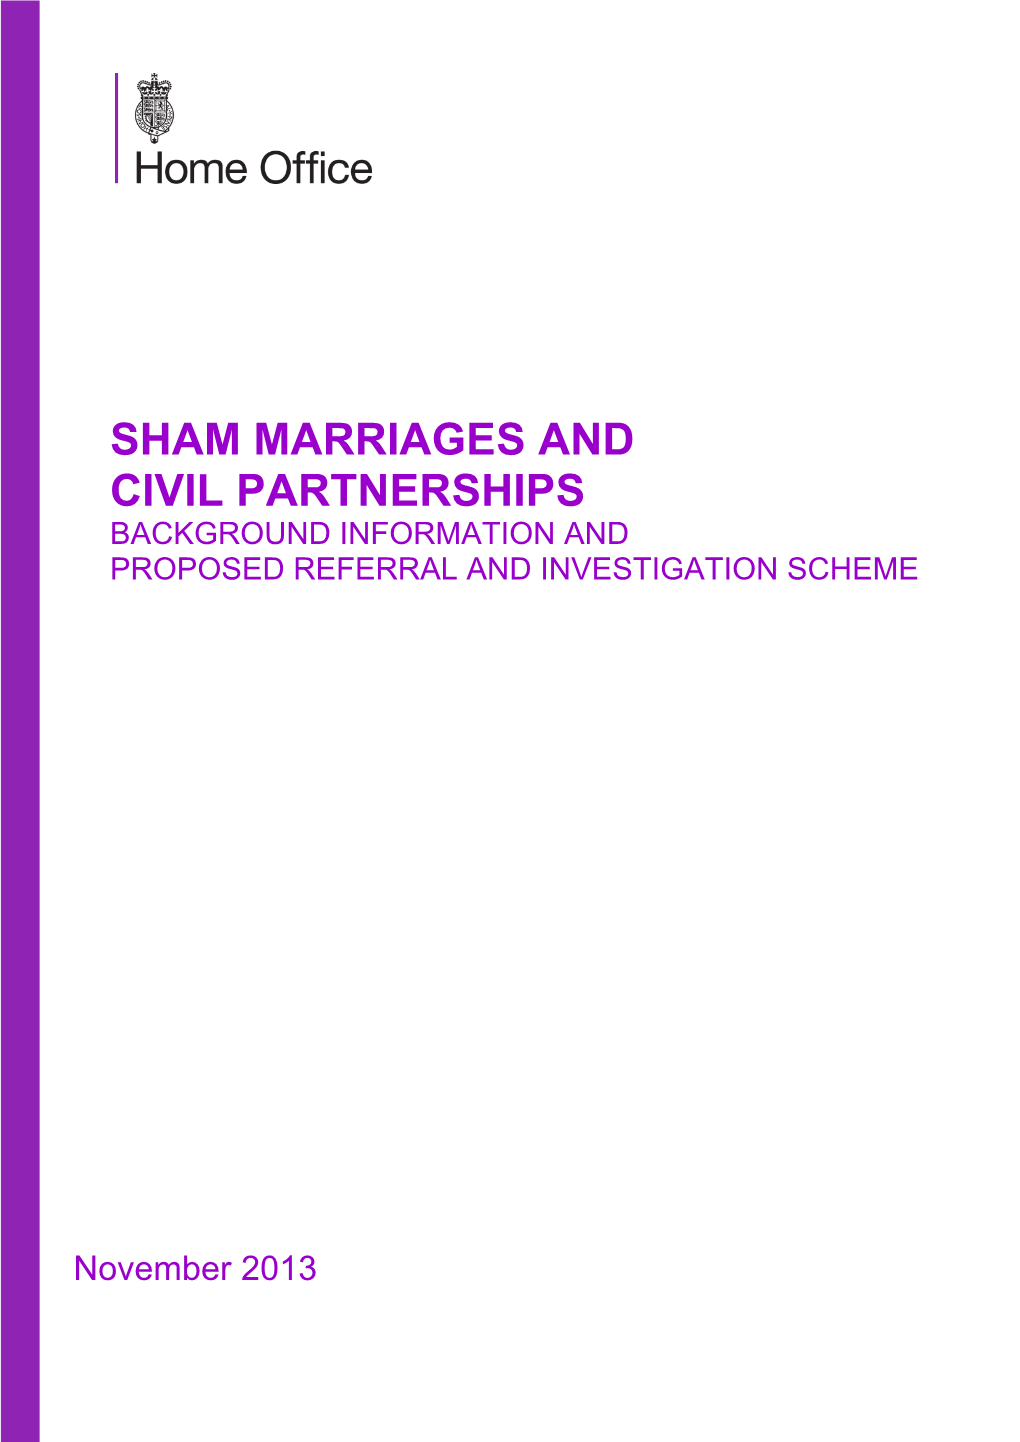 Sham Marriages and Civil Partnerships Background Information and Proposed Referral and Investigation Scheme